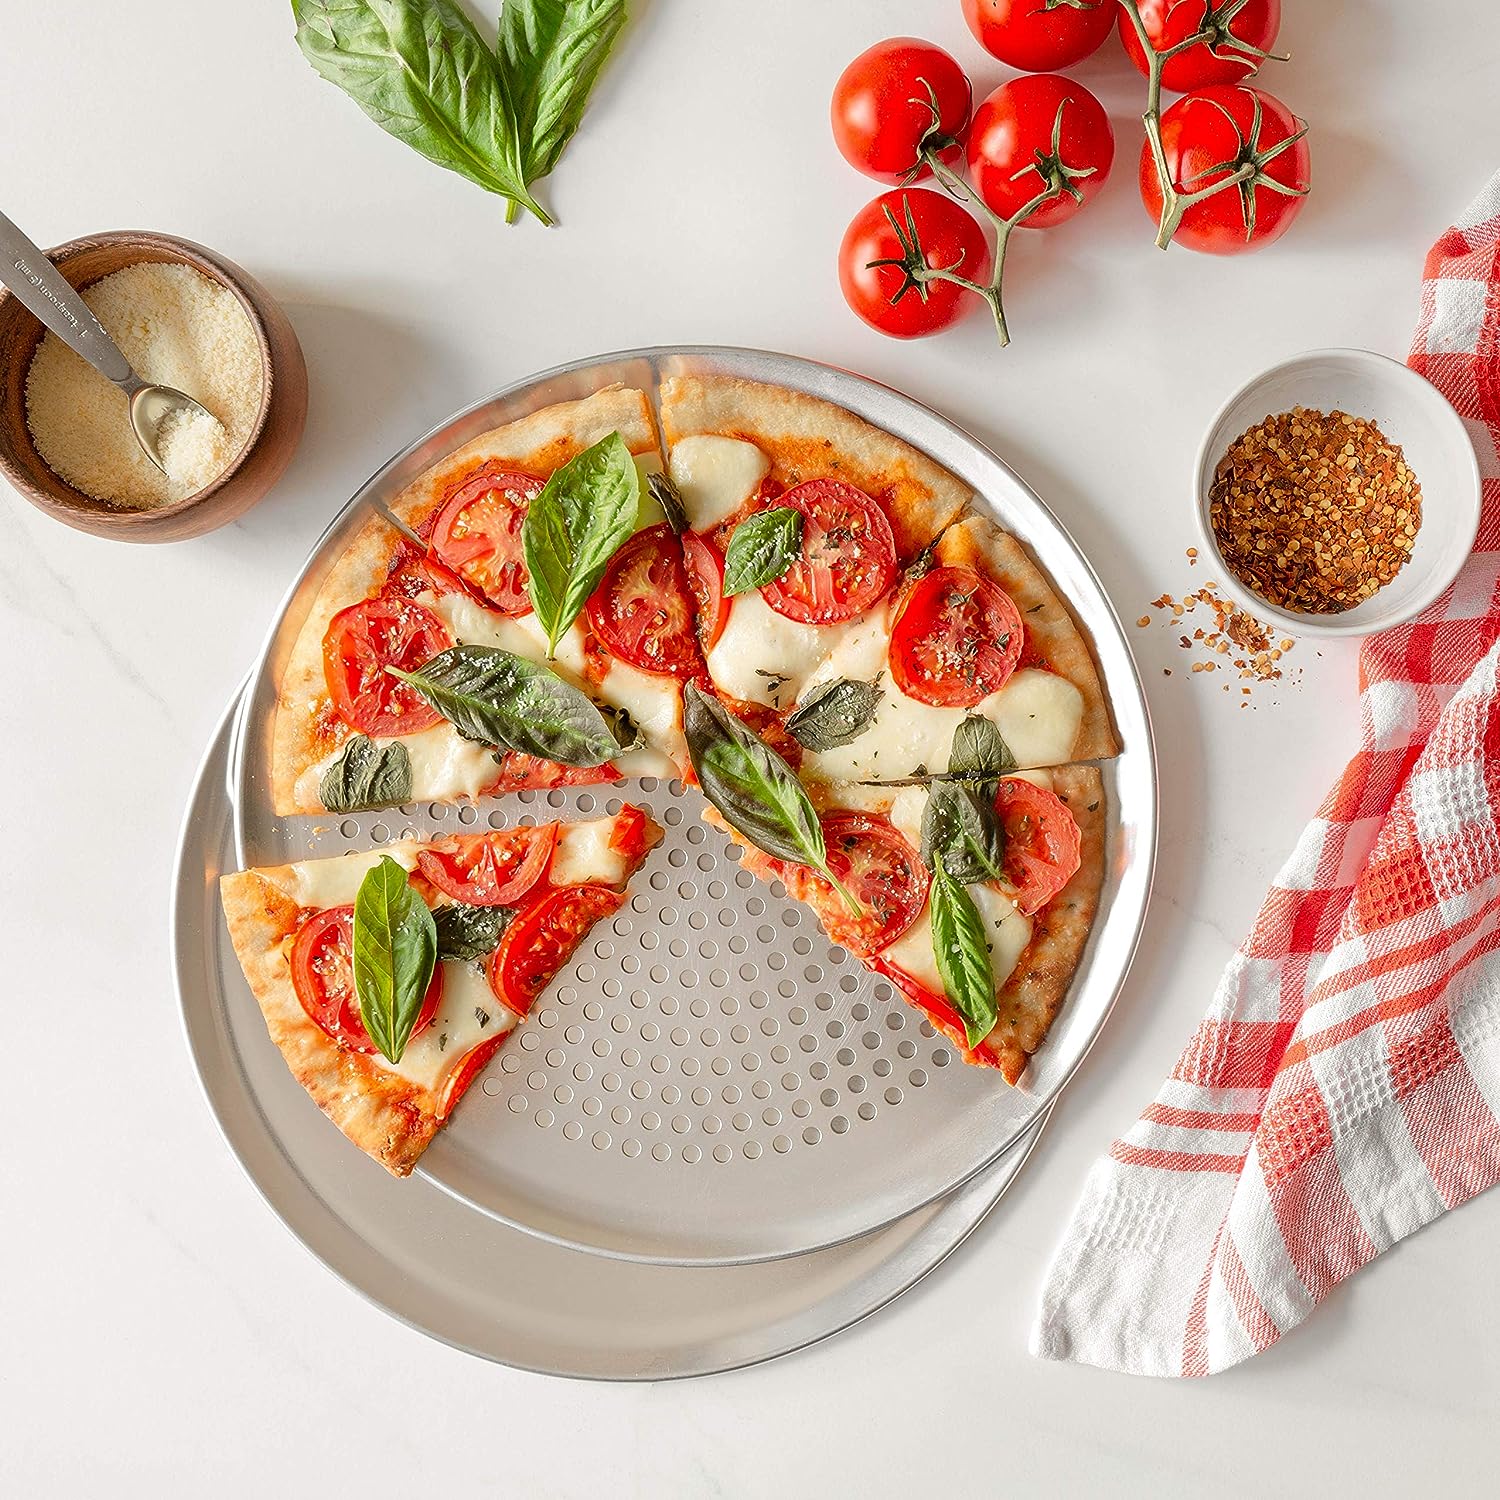 13-inch Pizza Baking Set with 3 Pizza Pans and Pizza Rack – Chef Pomodoro